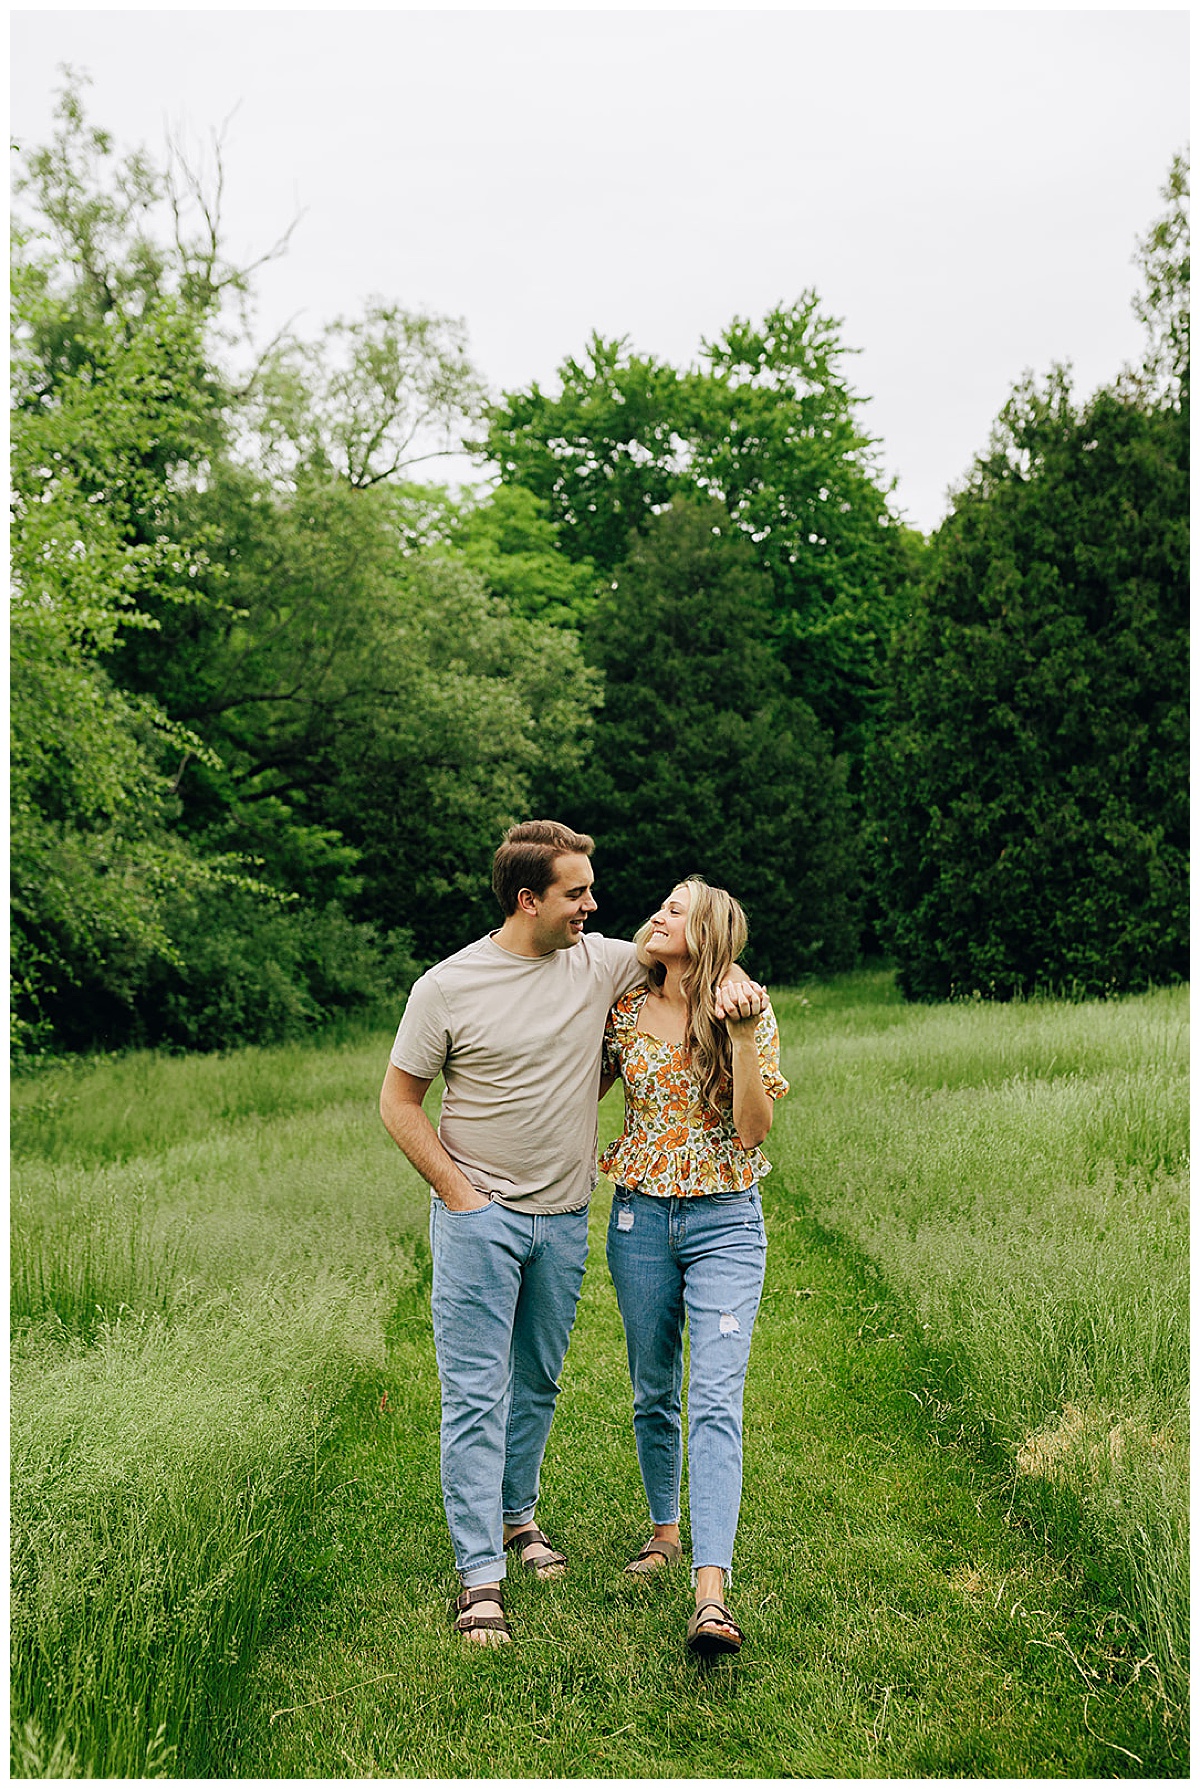 Man holds woman in grassy area for Kayla Bouren Photography